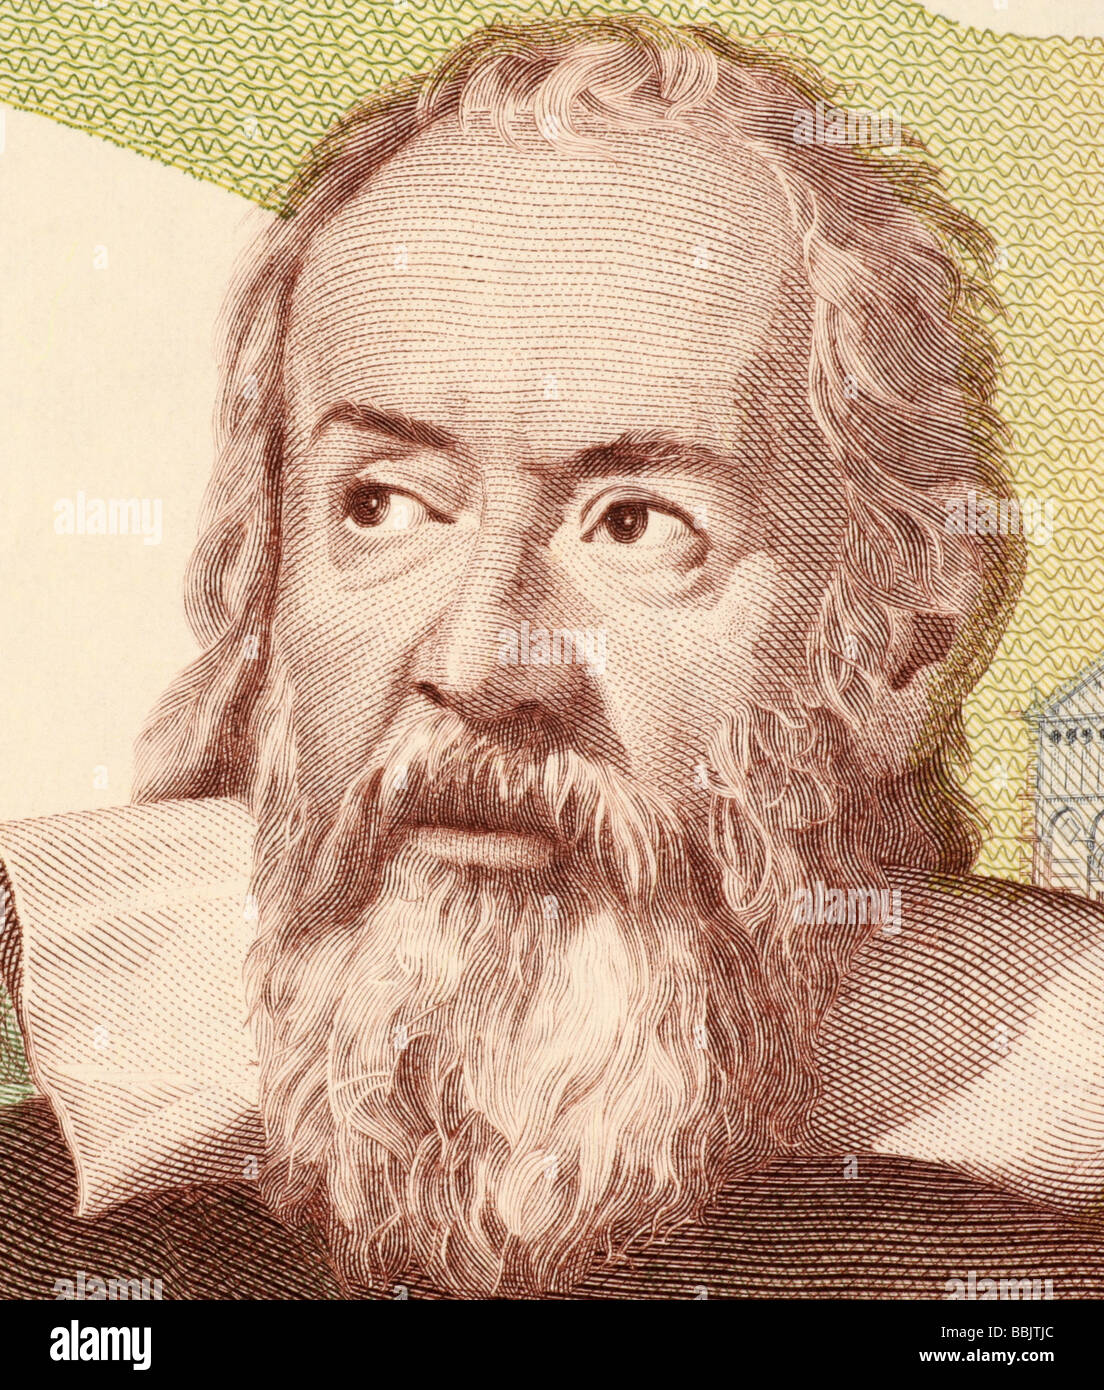 Galileo on 2000 Lire 1983 banknote from Italy. Italian physicist, astronomer, mathematician and philosopher. Stock Photo